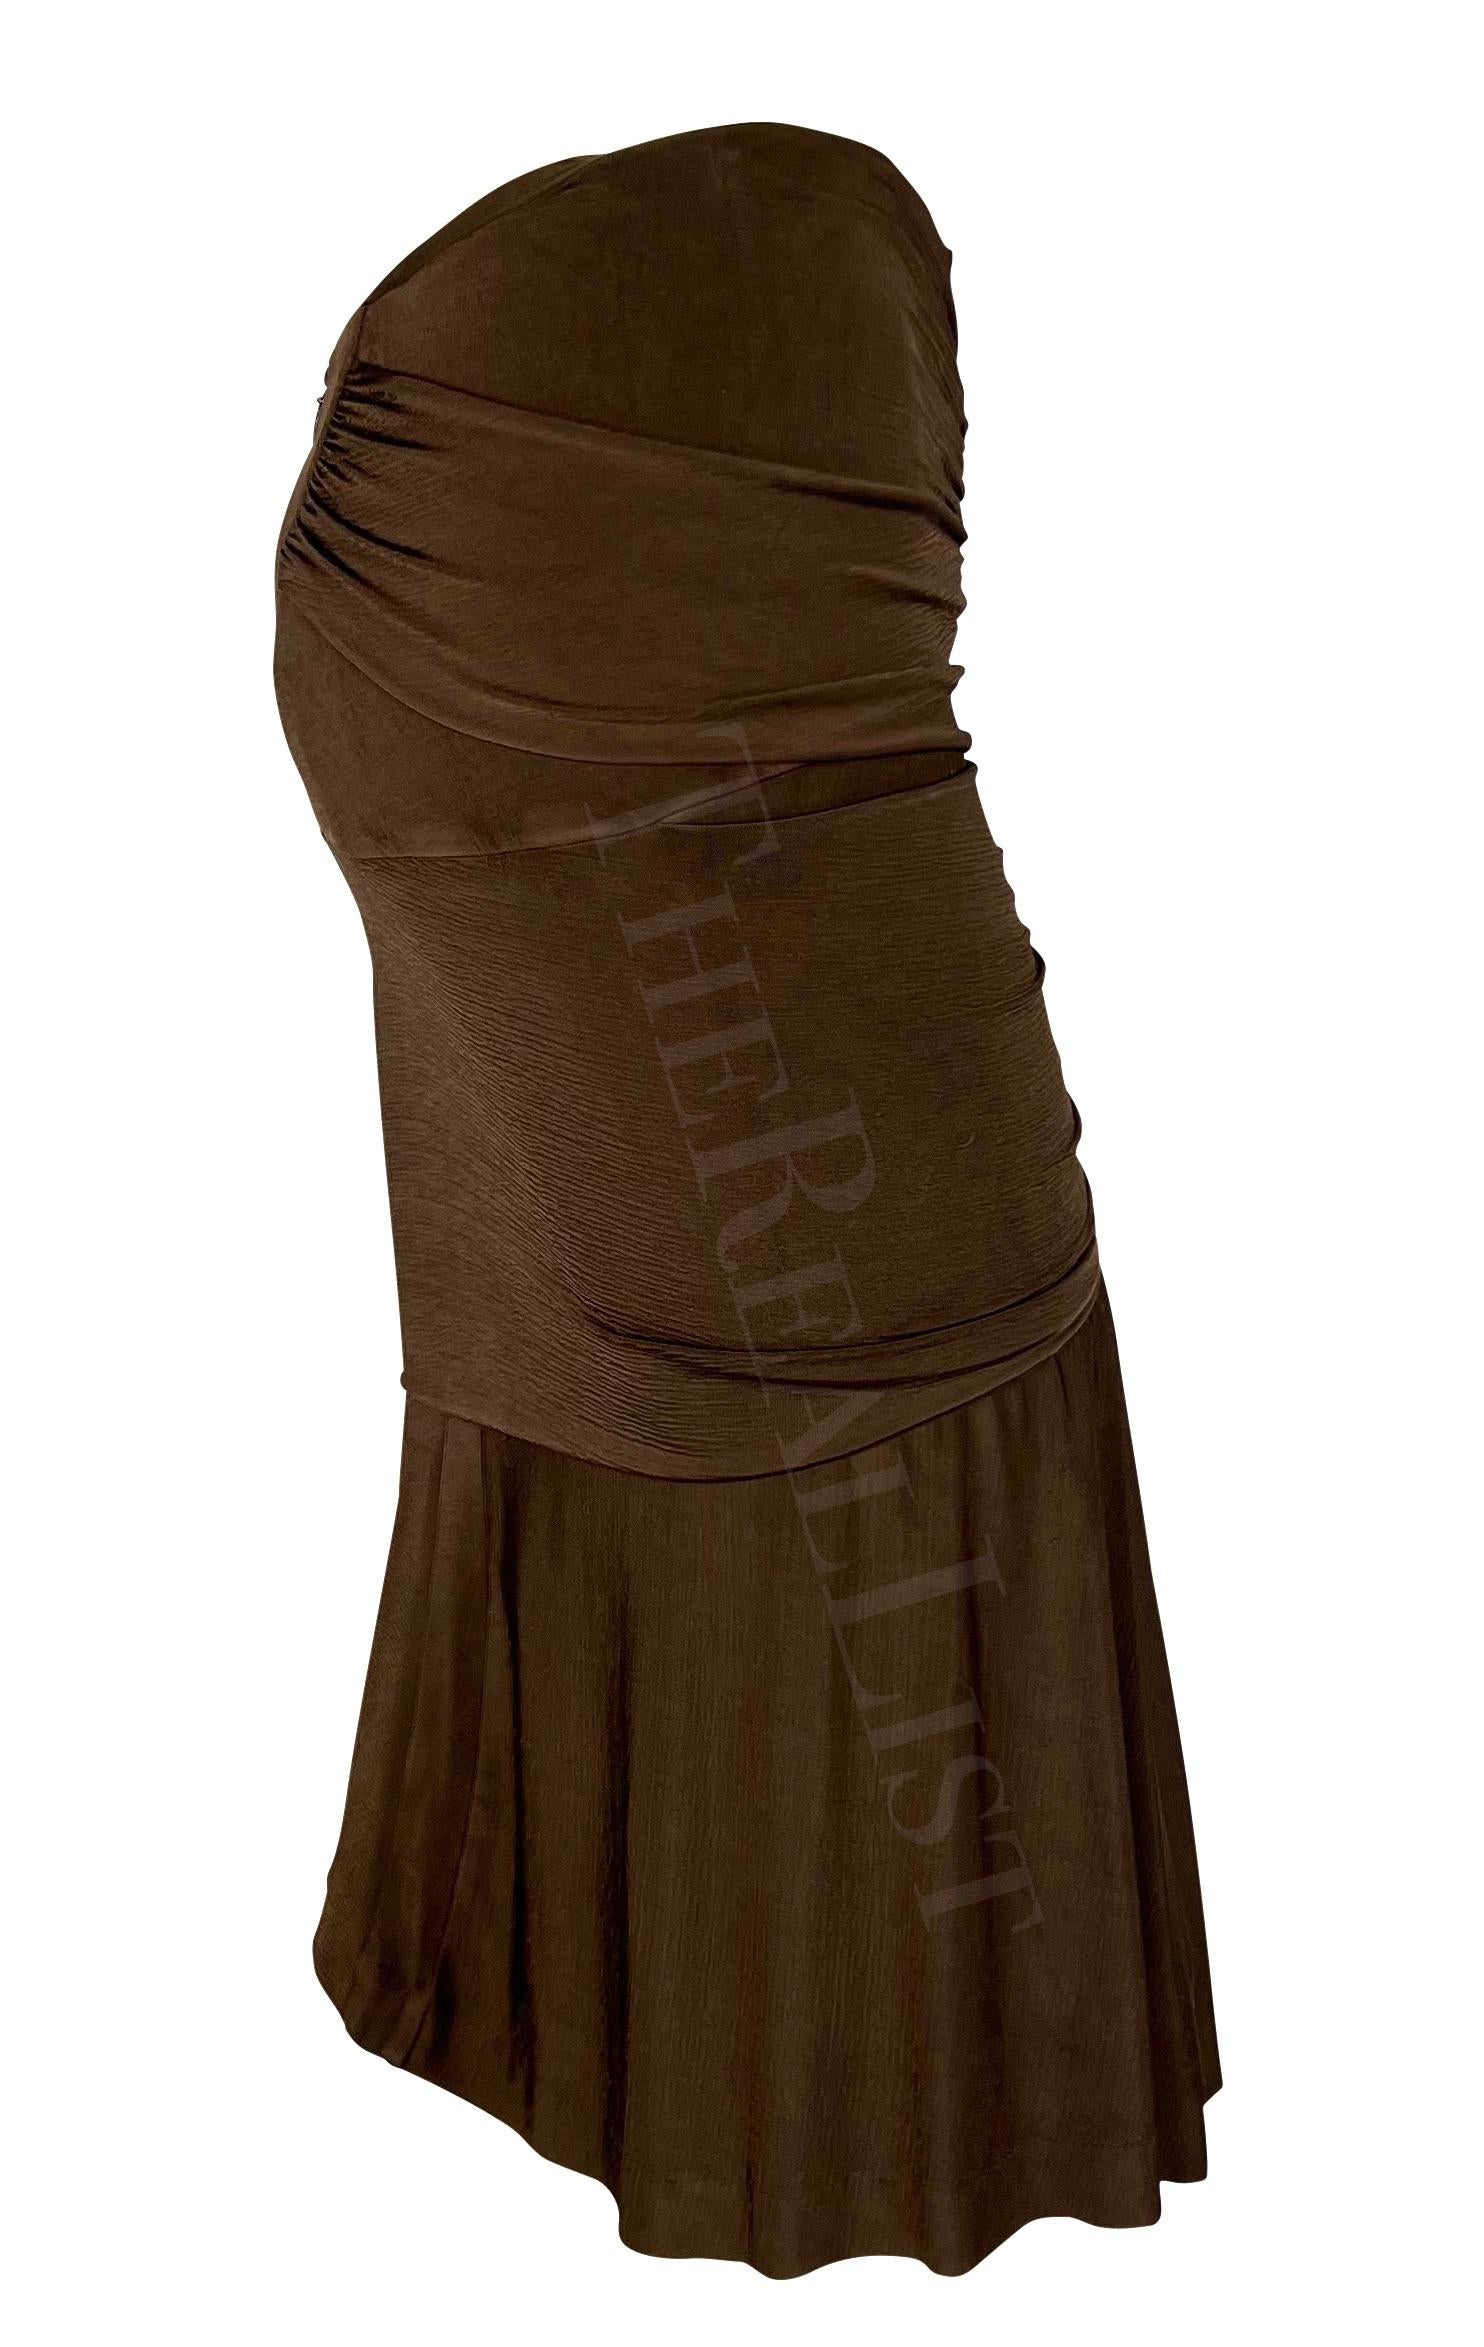 S/S 2003 Yves Saint Laurent by Tom Ford Runway Brown Ruched Slinky Skirt For Sale 5